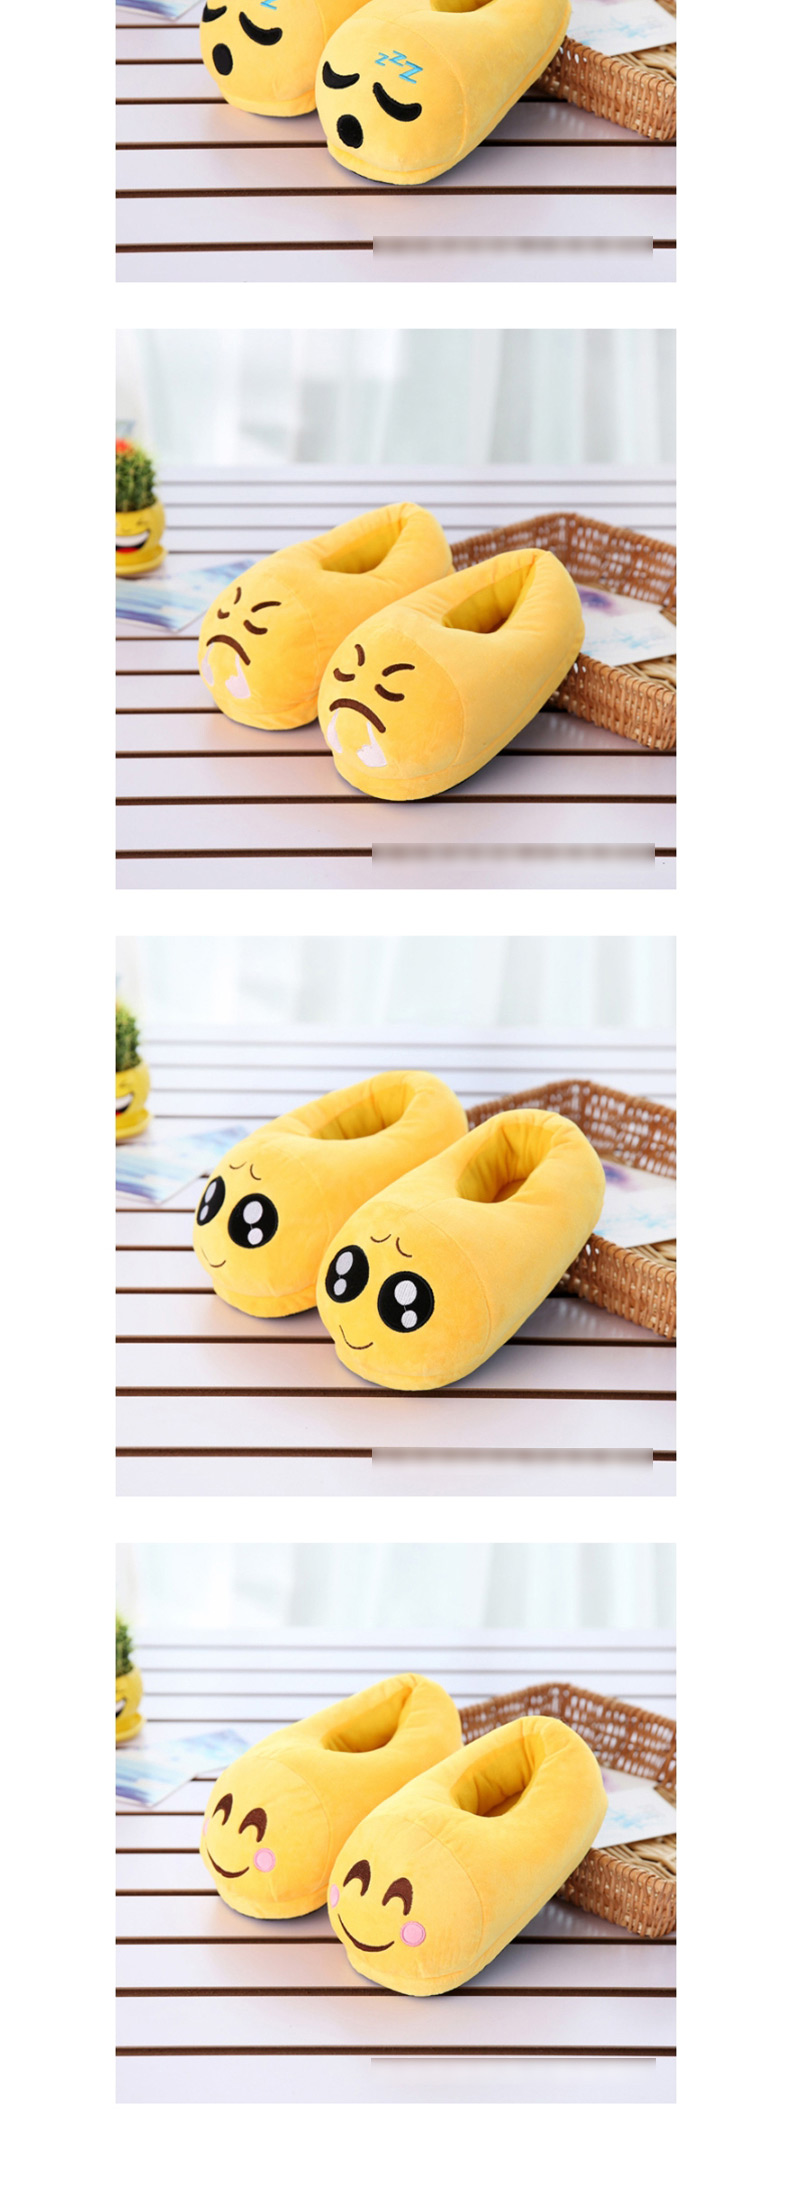 Fashion 2 Yellow Love Cartoon Expression Plush Bag With Cotton Slippers,Slippers